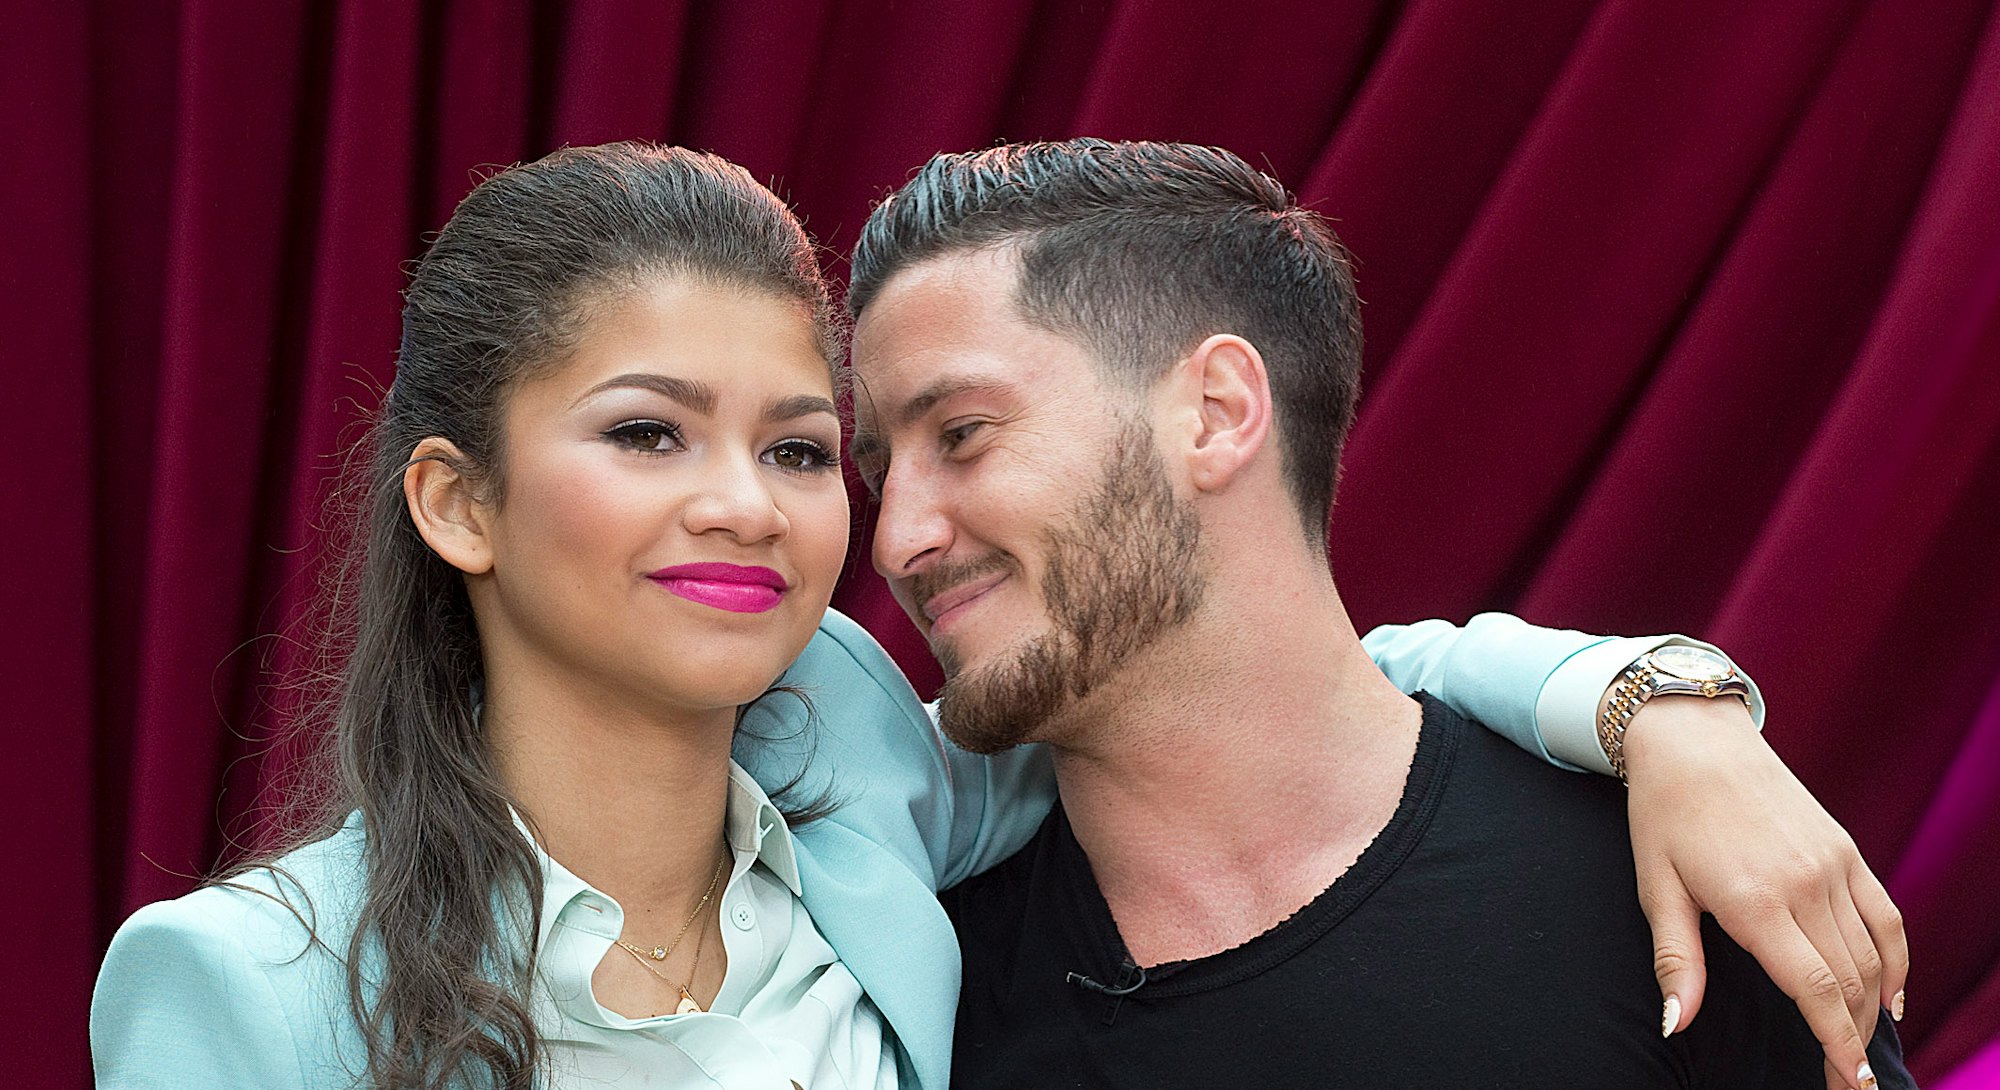 Zendaya Coleman and Val Chmerkovskly from 'Dancing With the Stars' in 2013.